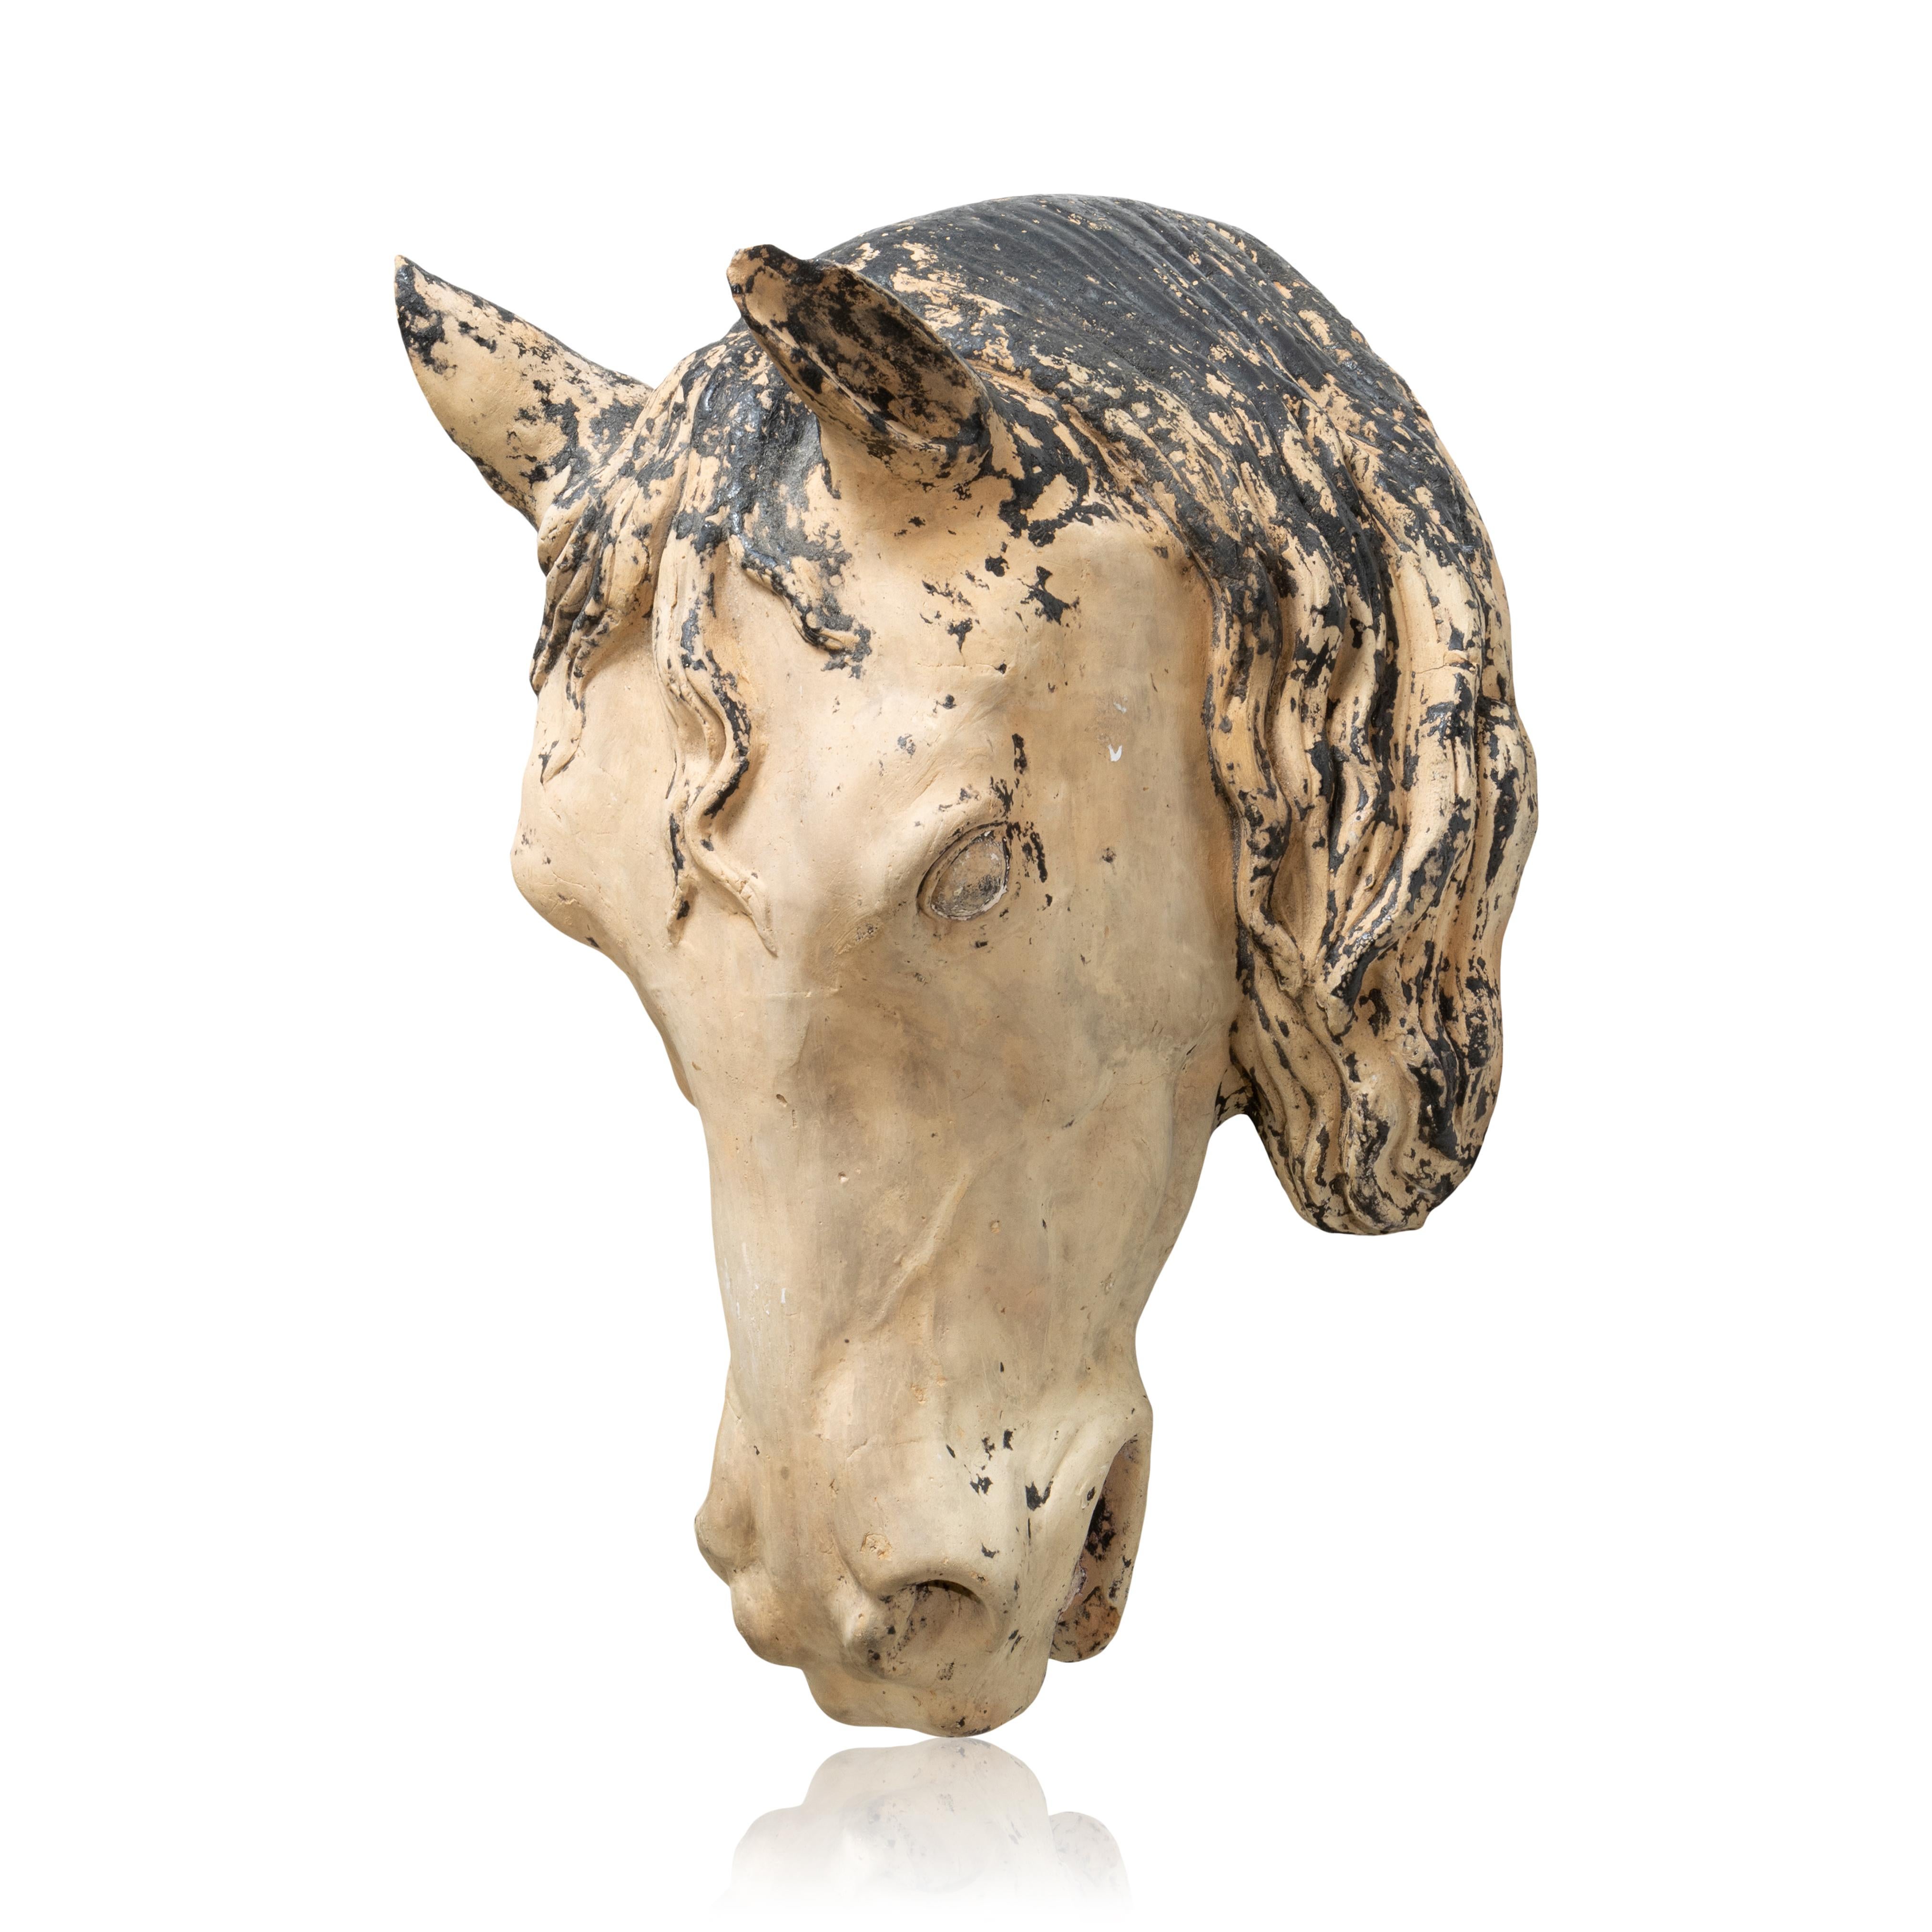 19th century French terracotta horse head trade sign. Nice old white and black paint. 

PERIOD: Late 19th Century
ORIGIN: France, Europe
SIZE: 20